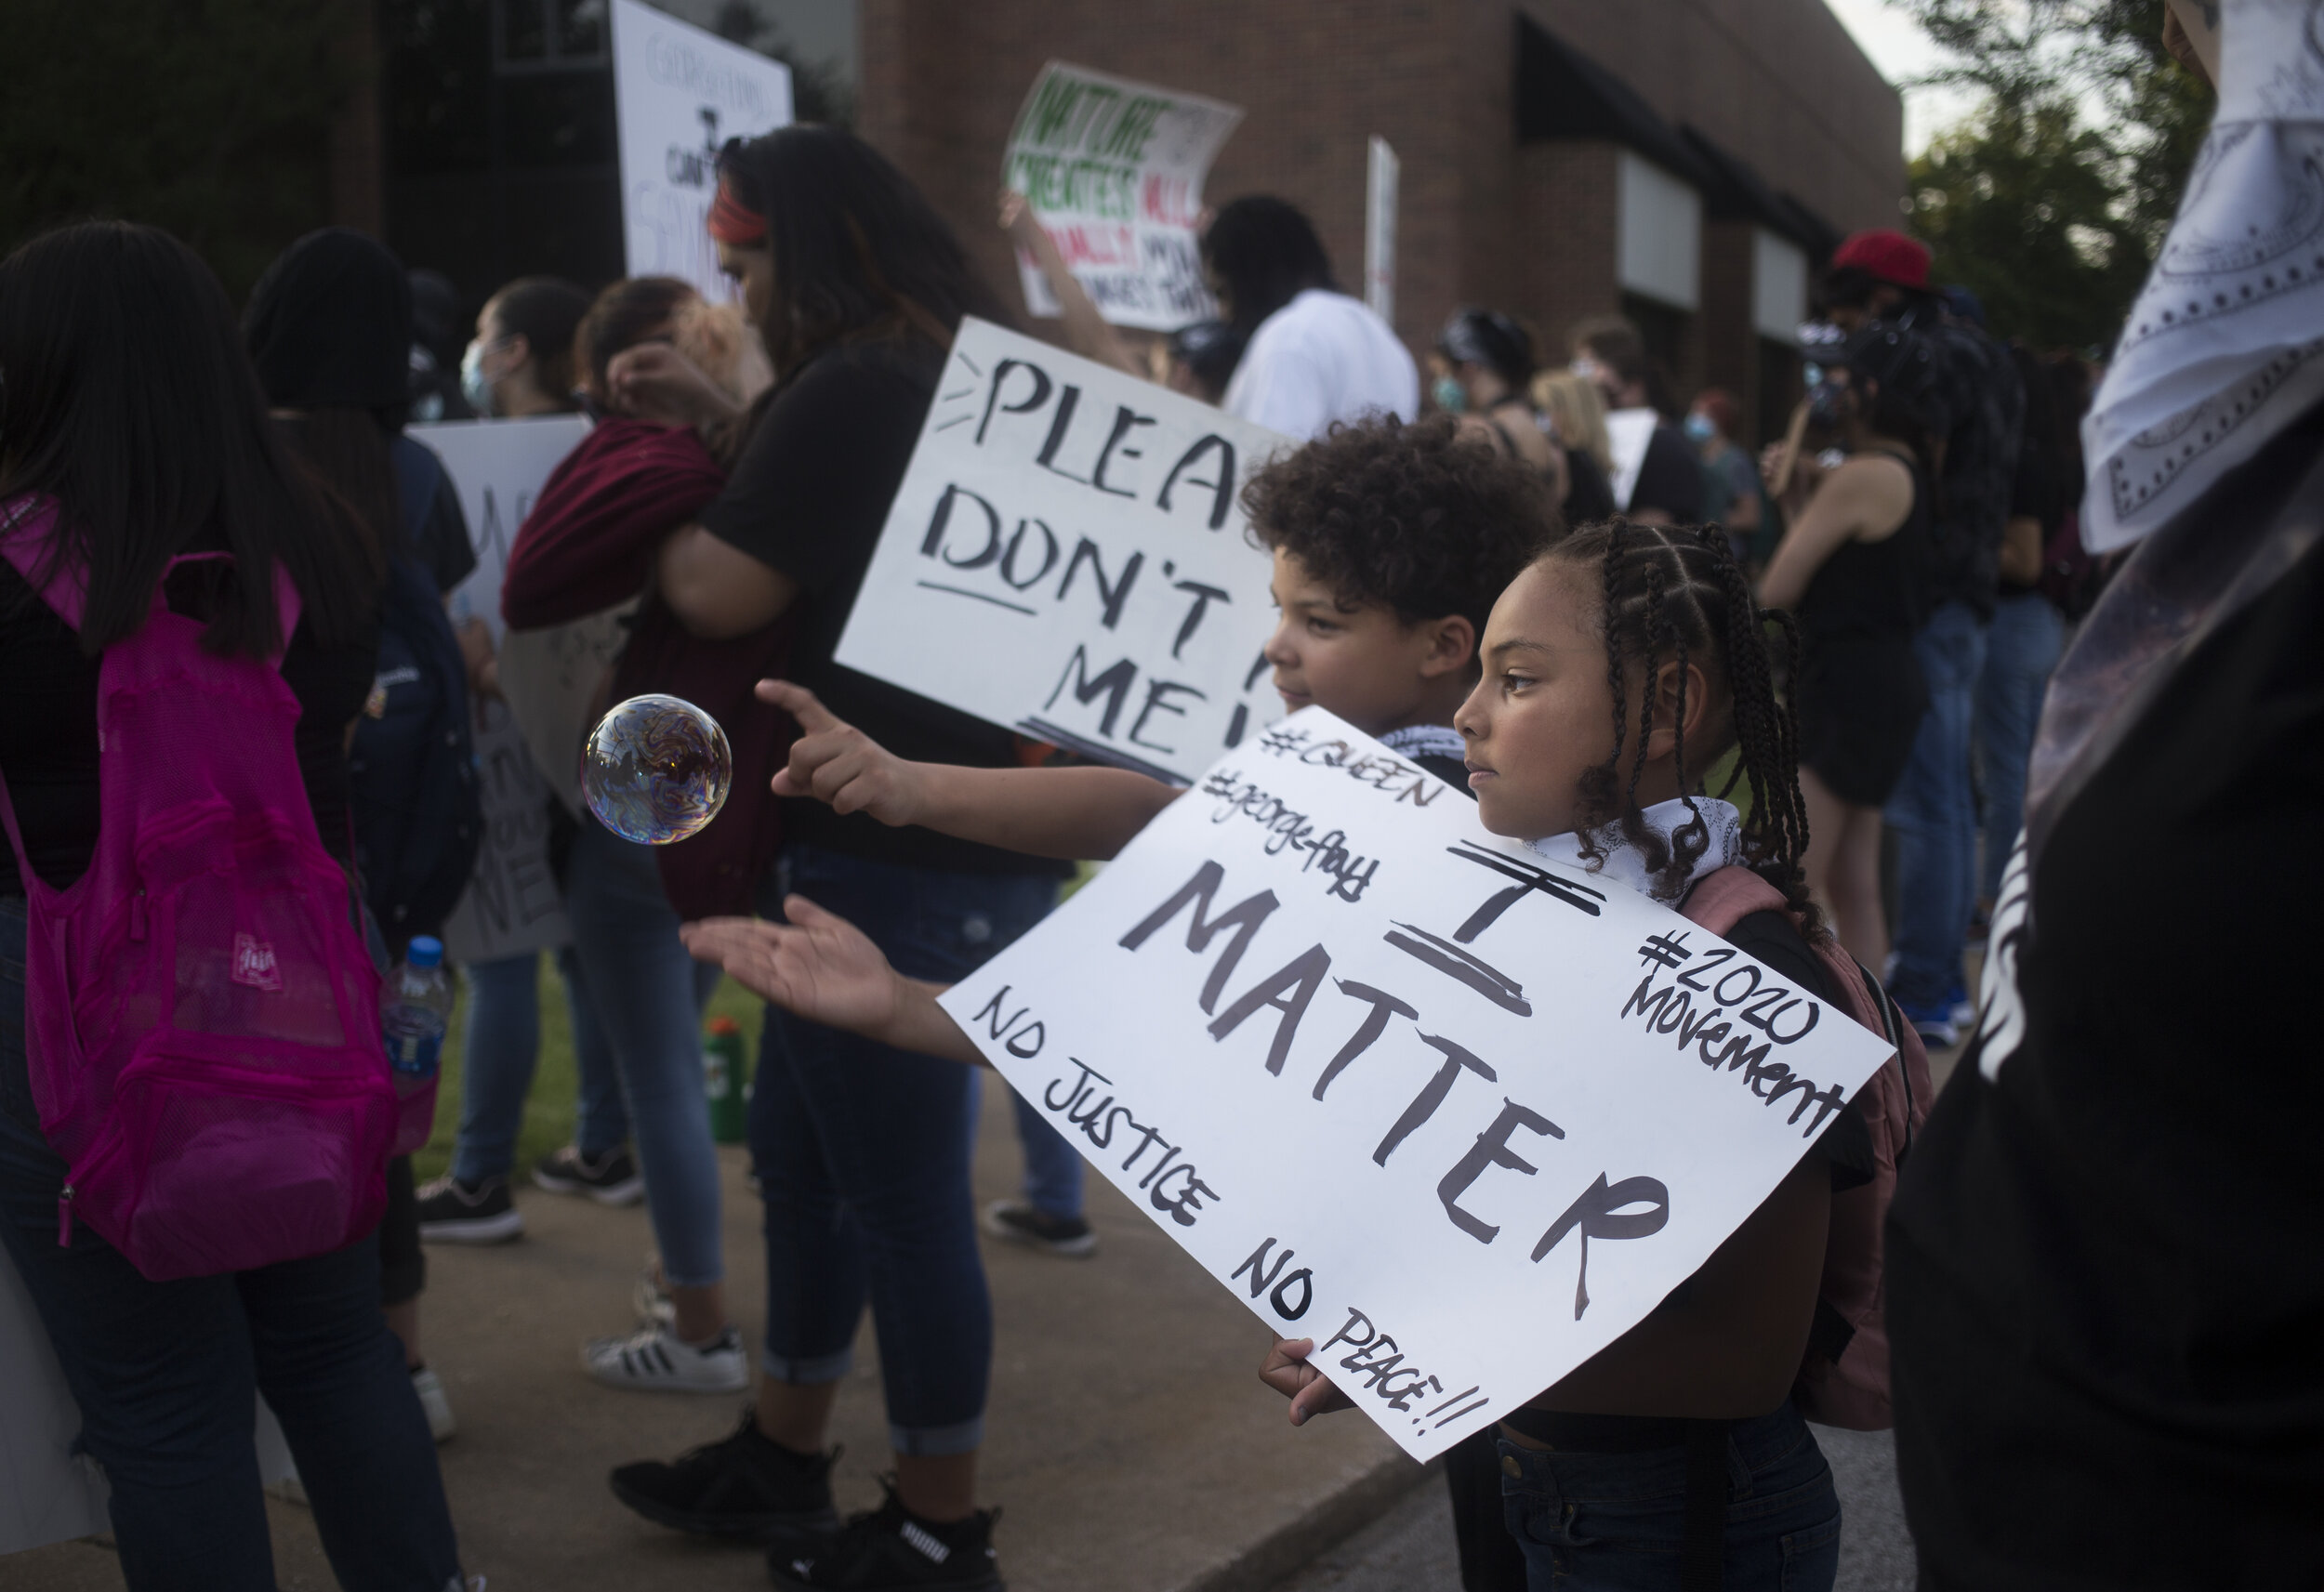  Dayon Malloy, 9, (from center left) and sister Lydia Malloy, 8, demonstrate during a protest against police brutality on the lawn of the Rogers City Hall in Rogers, Ark., Friday, June 5, 2020 